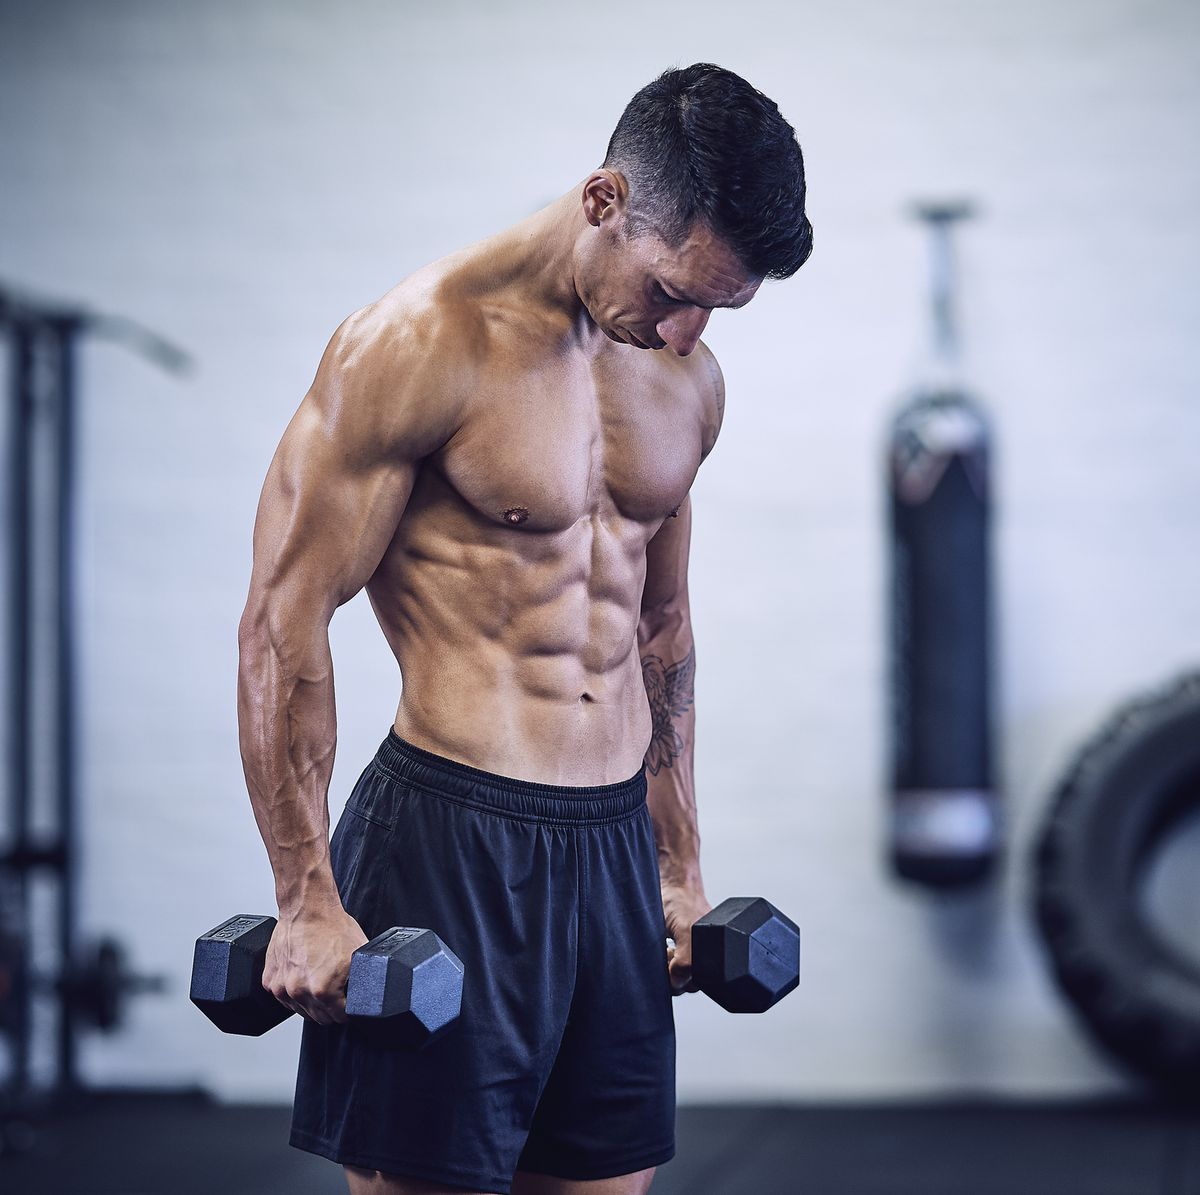 5 Ways To Build Muscle Density & Boost Your Strength